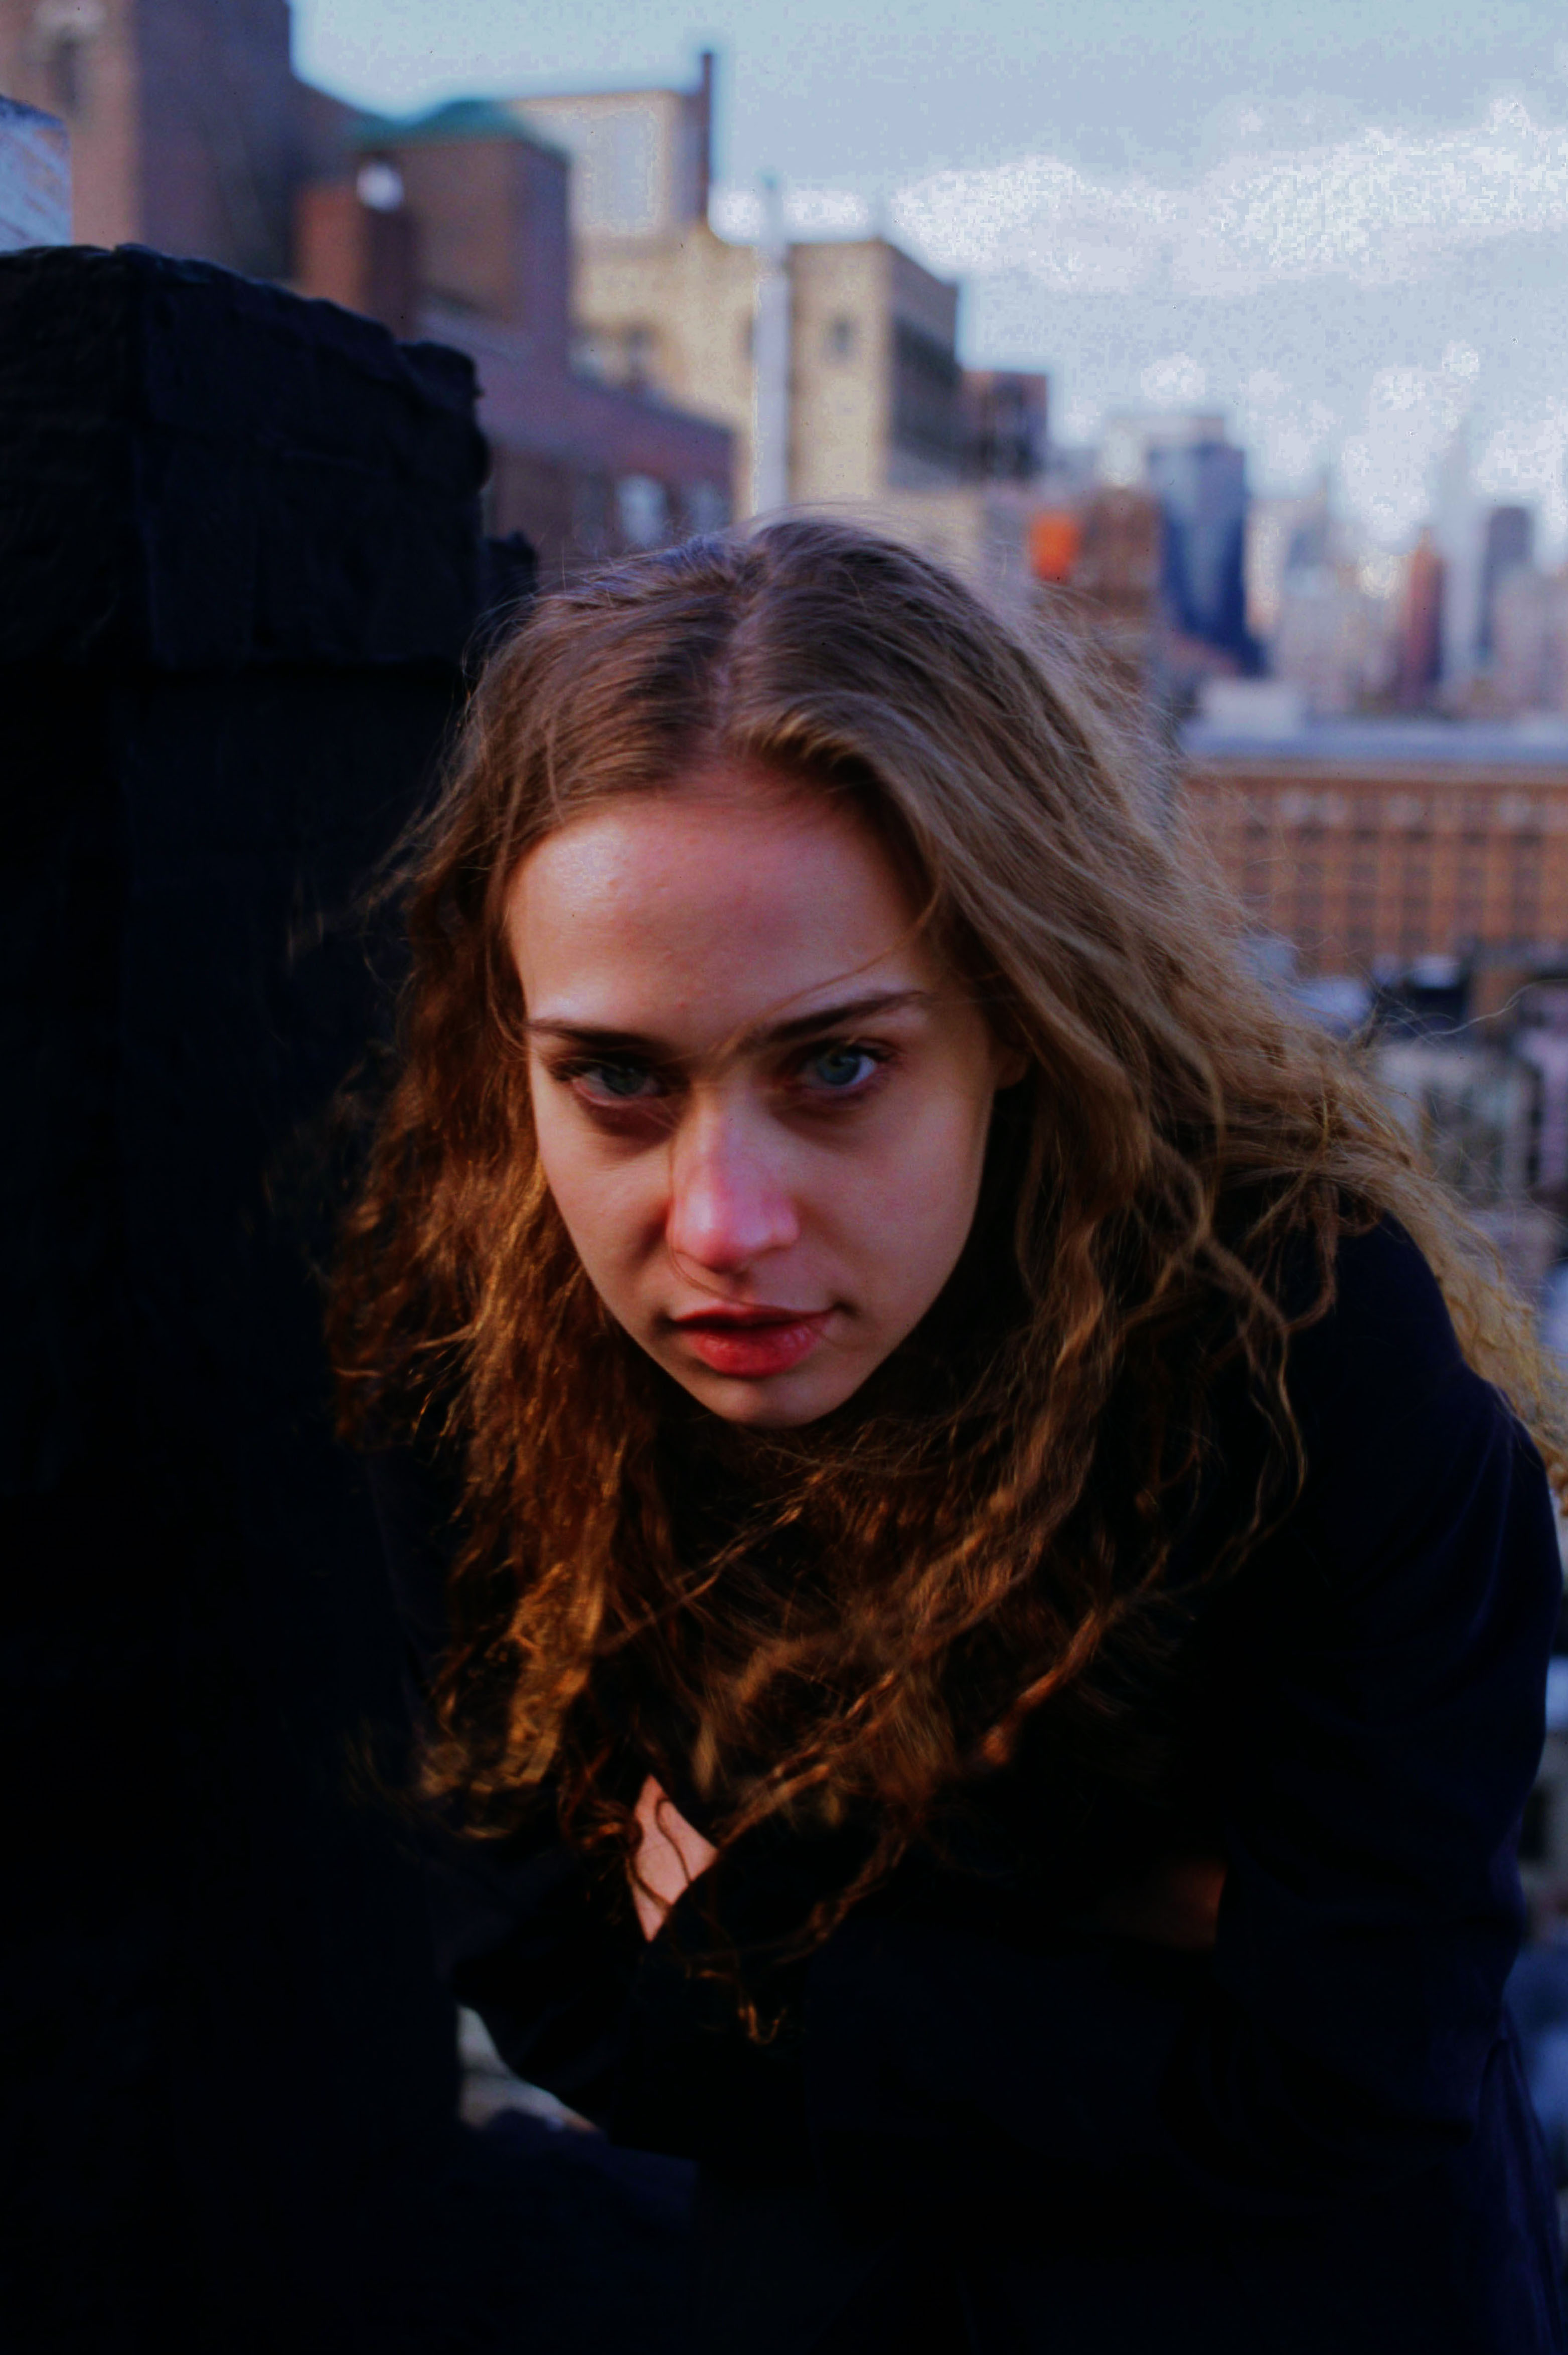 Girl Trouble: Our 1997 Fiona Apple Cover Story